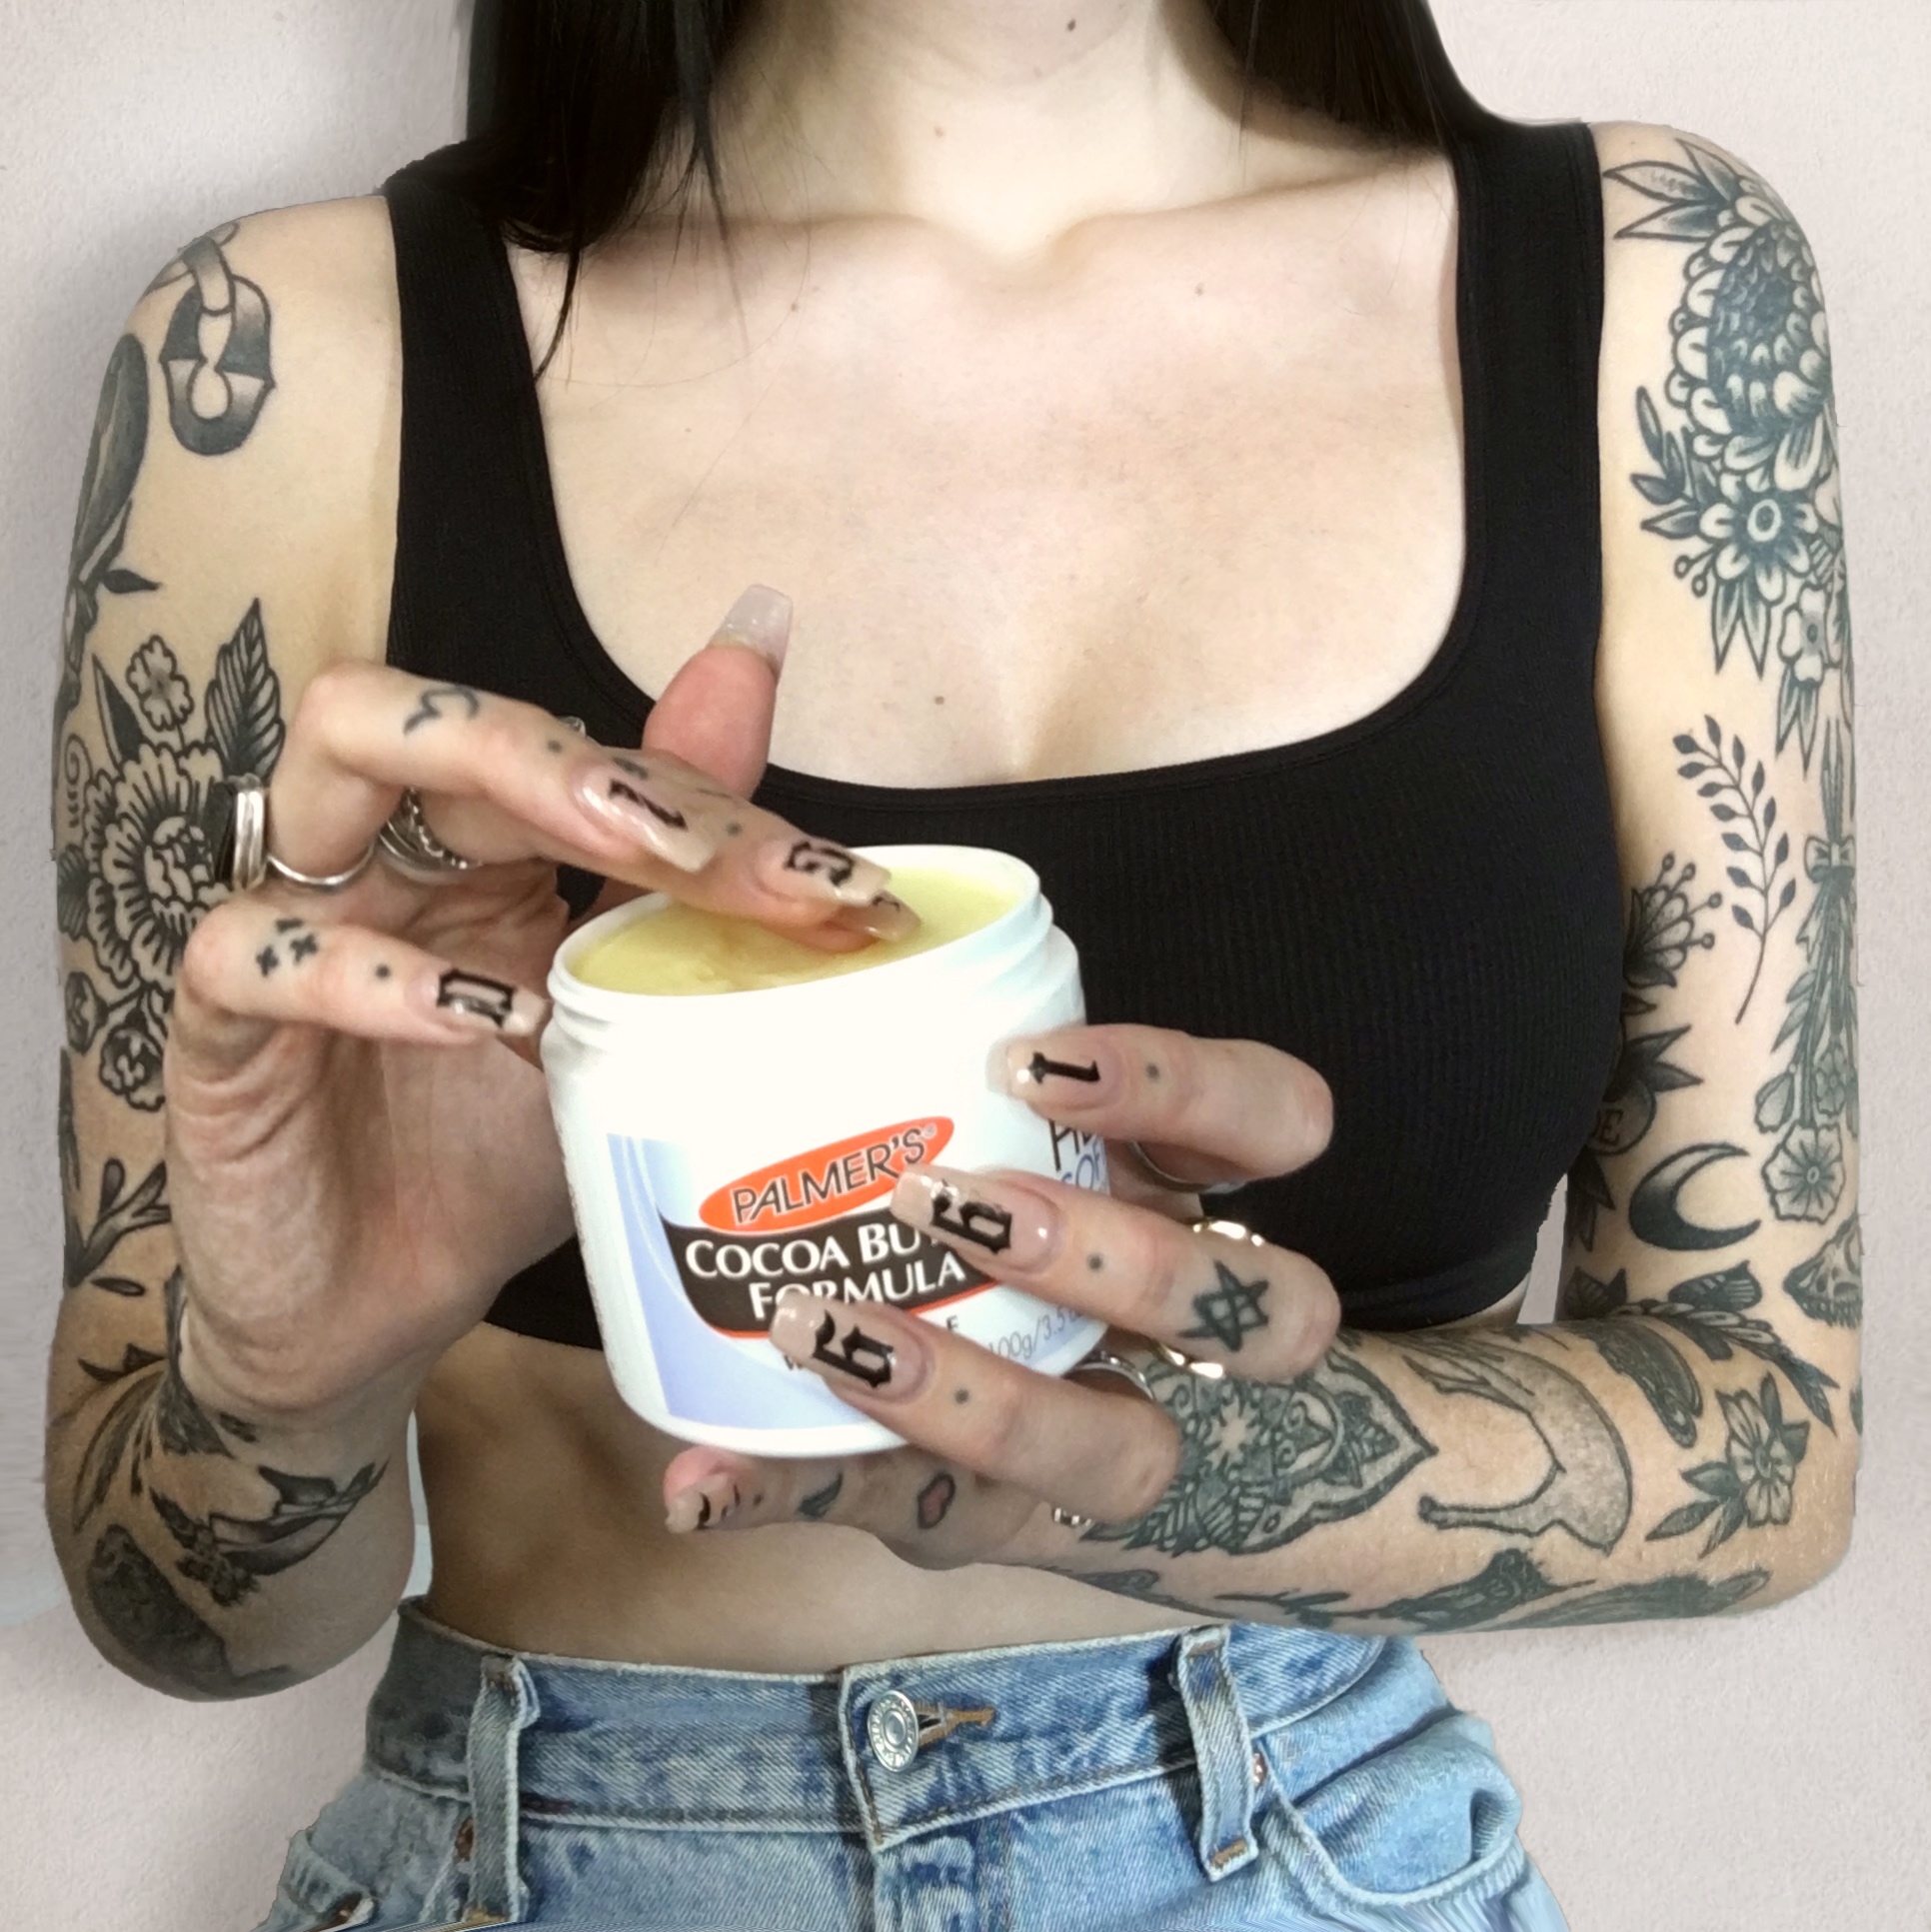 The Undeniable Benefits of Using Cocoa Butter on a Healed Tattoo